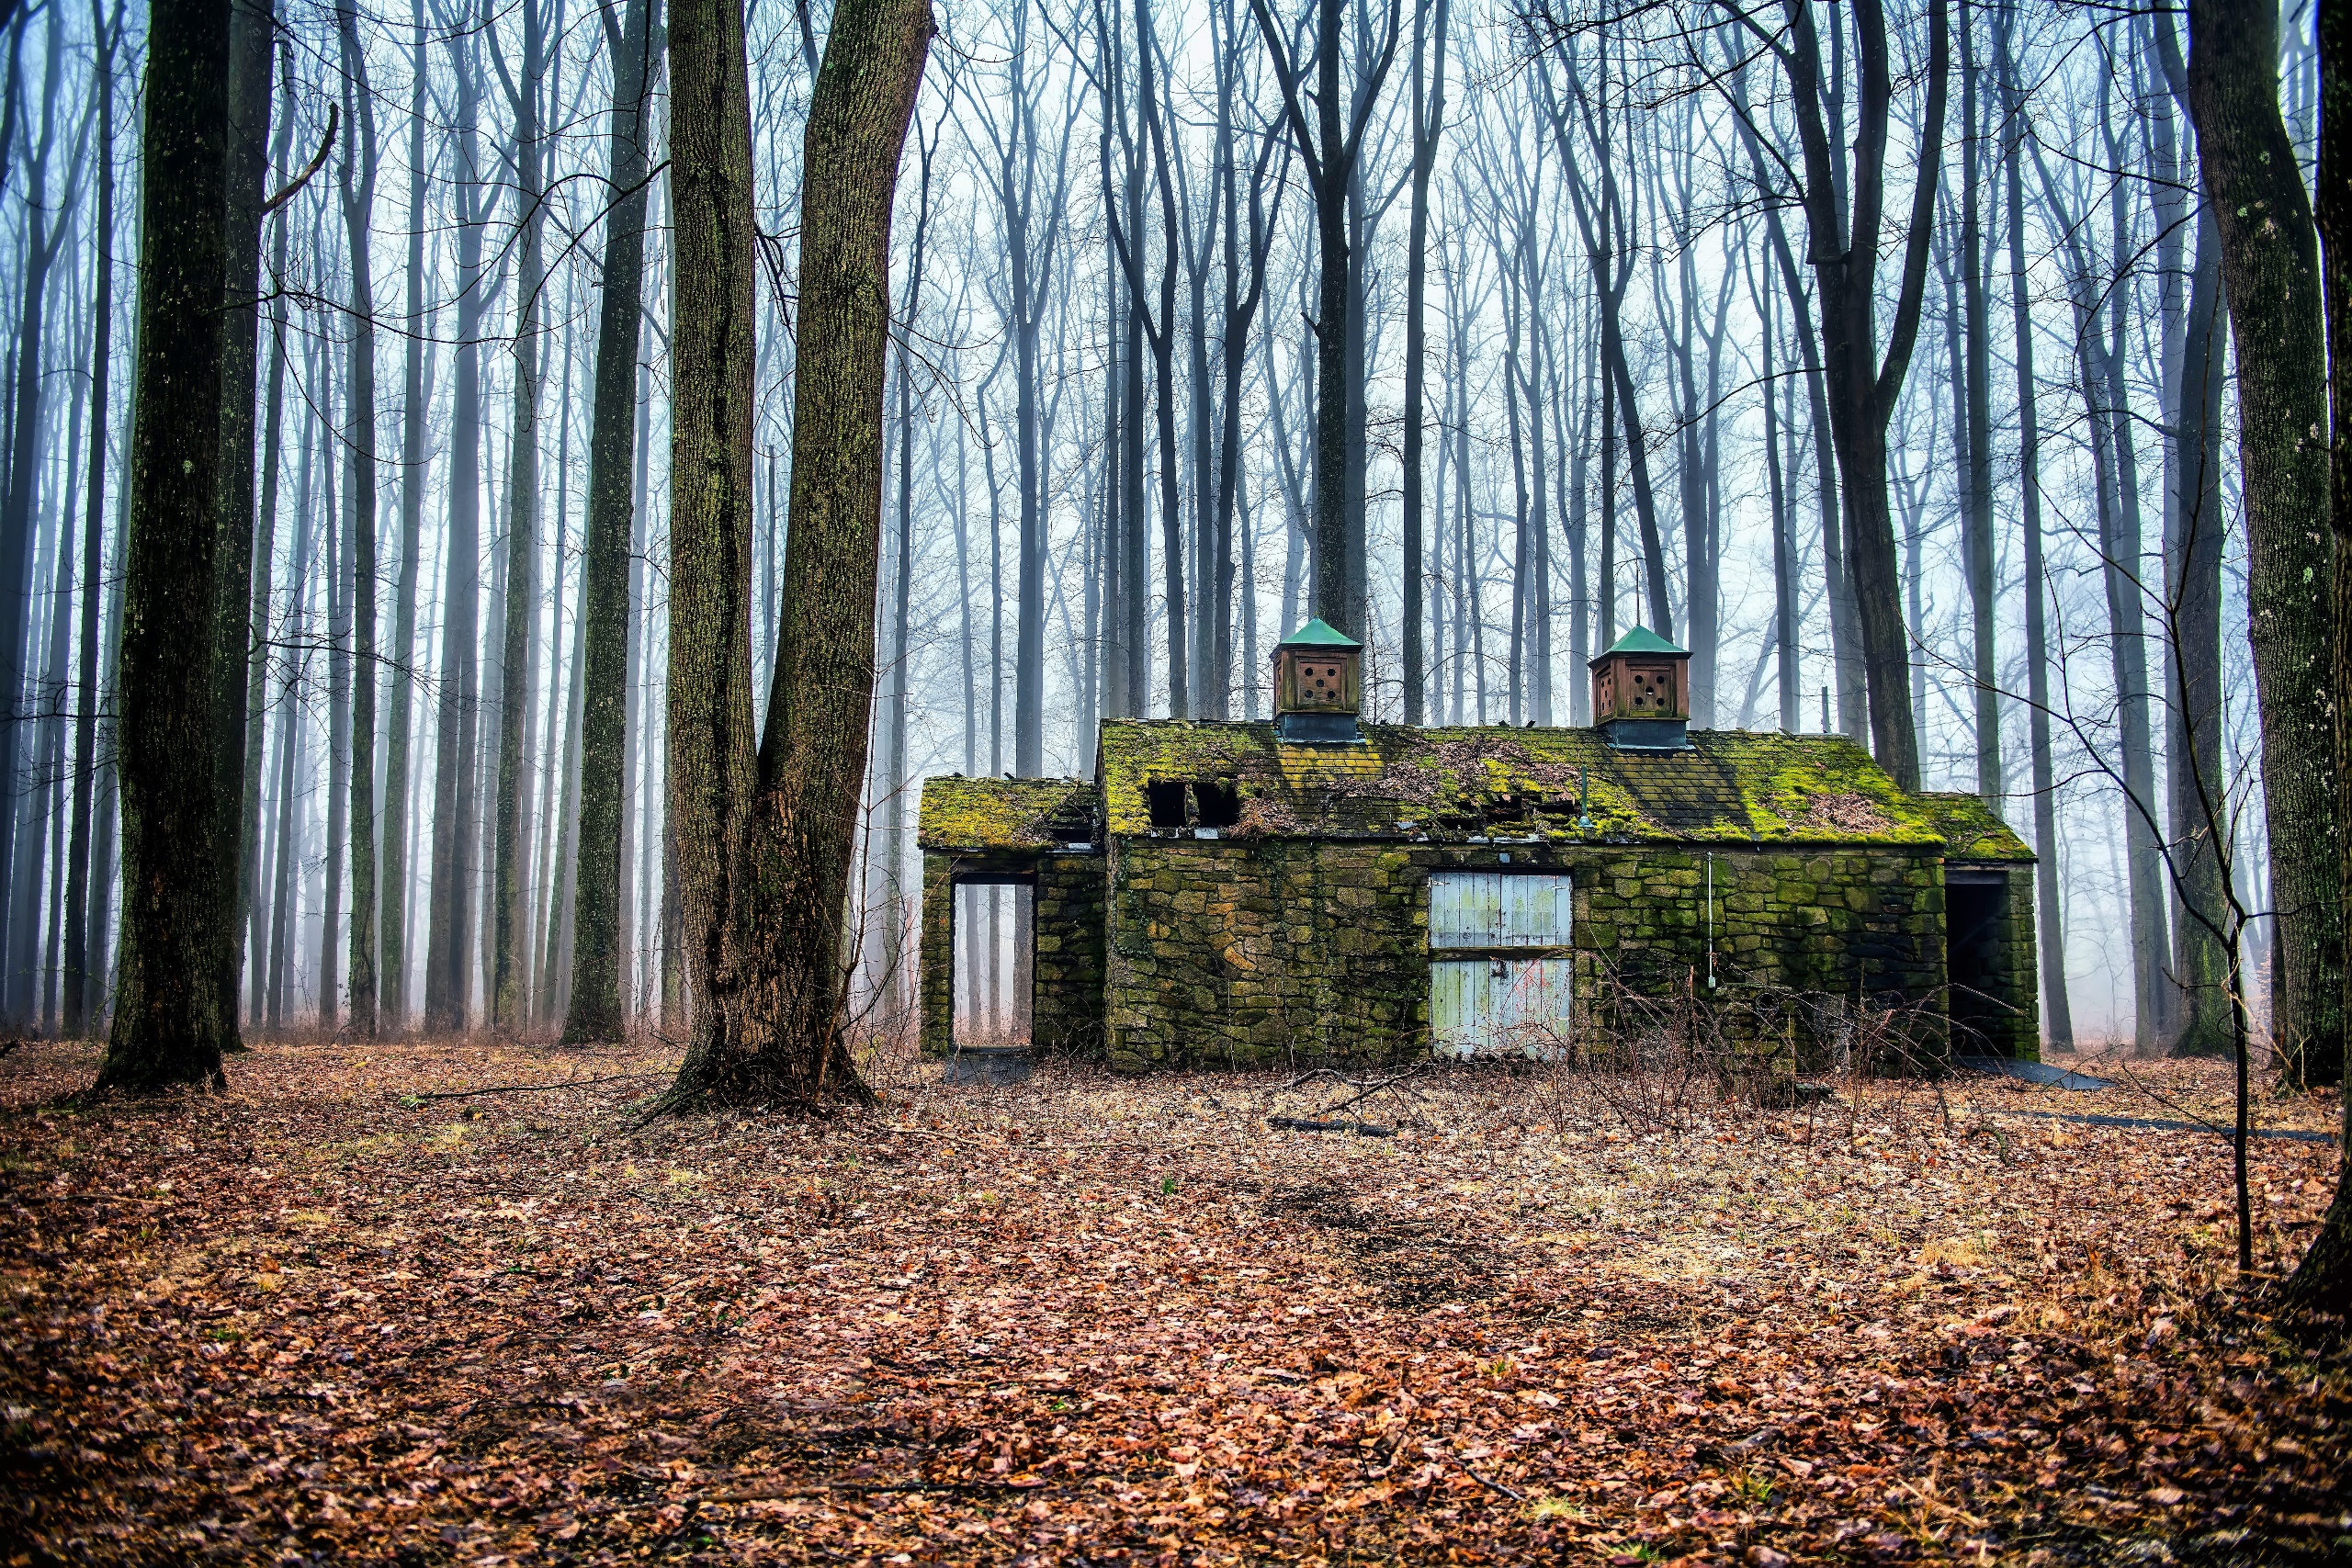 General 2560x1707 trees forest outdoors ruins mist moss cabin